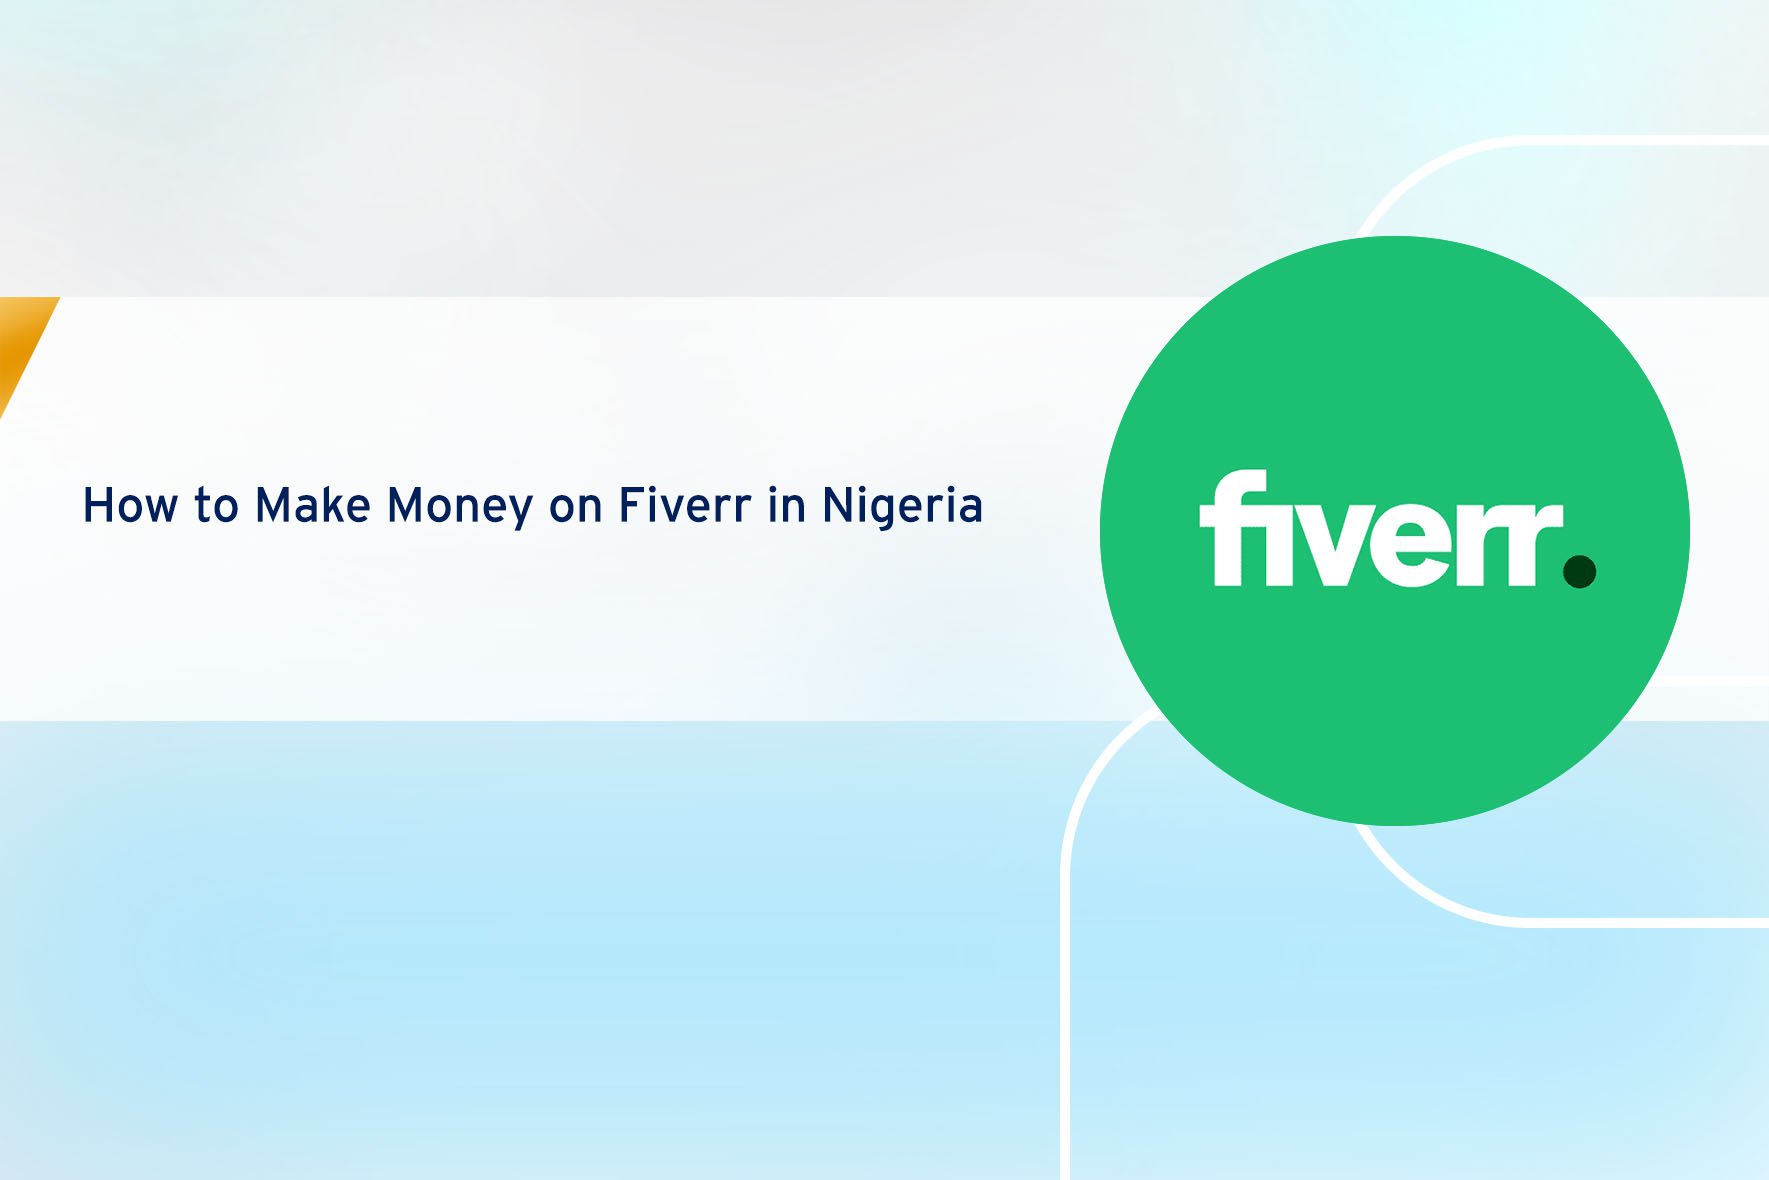 how to make money on Fiverr in Nigeria